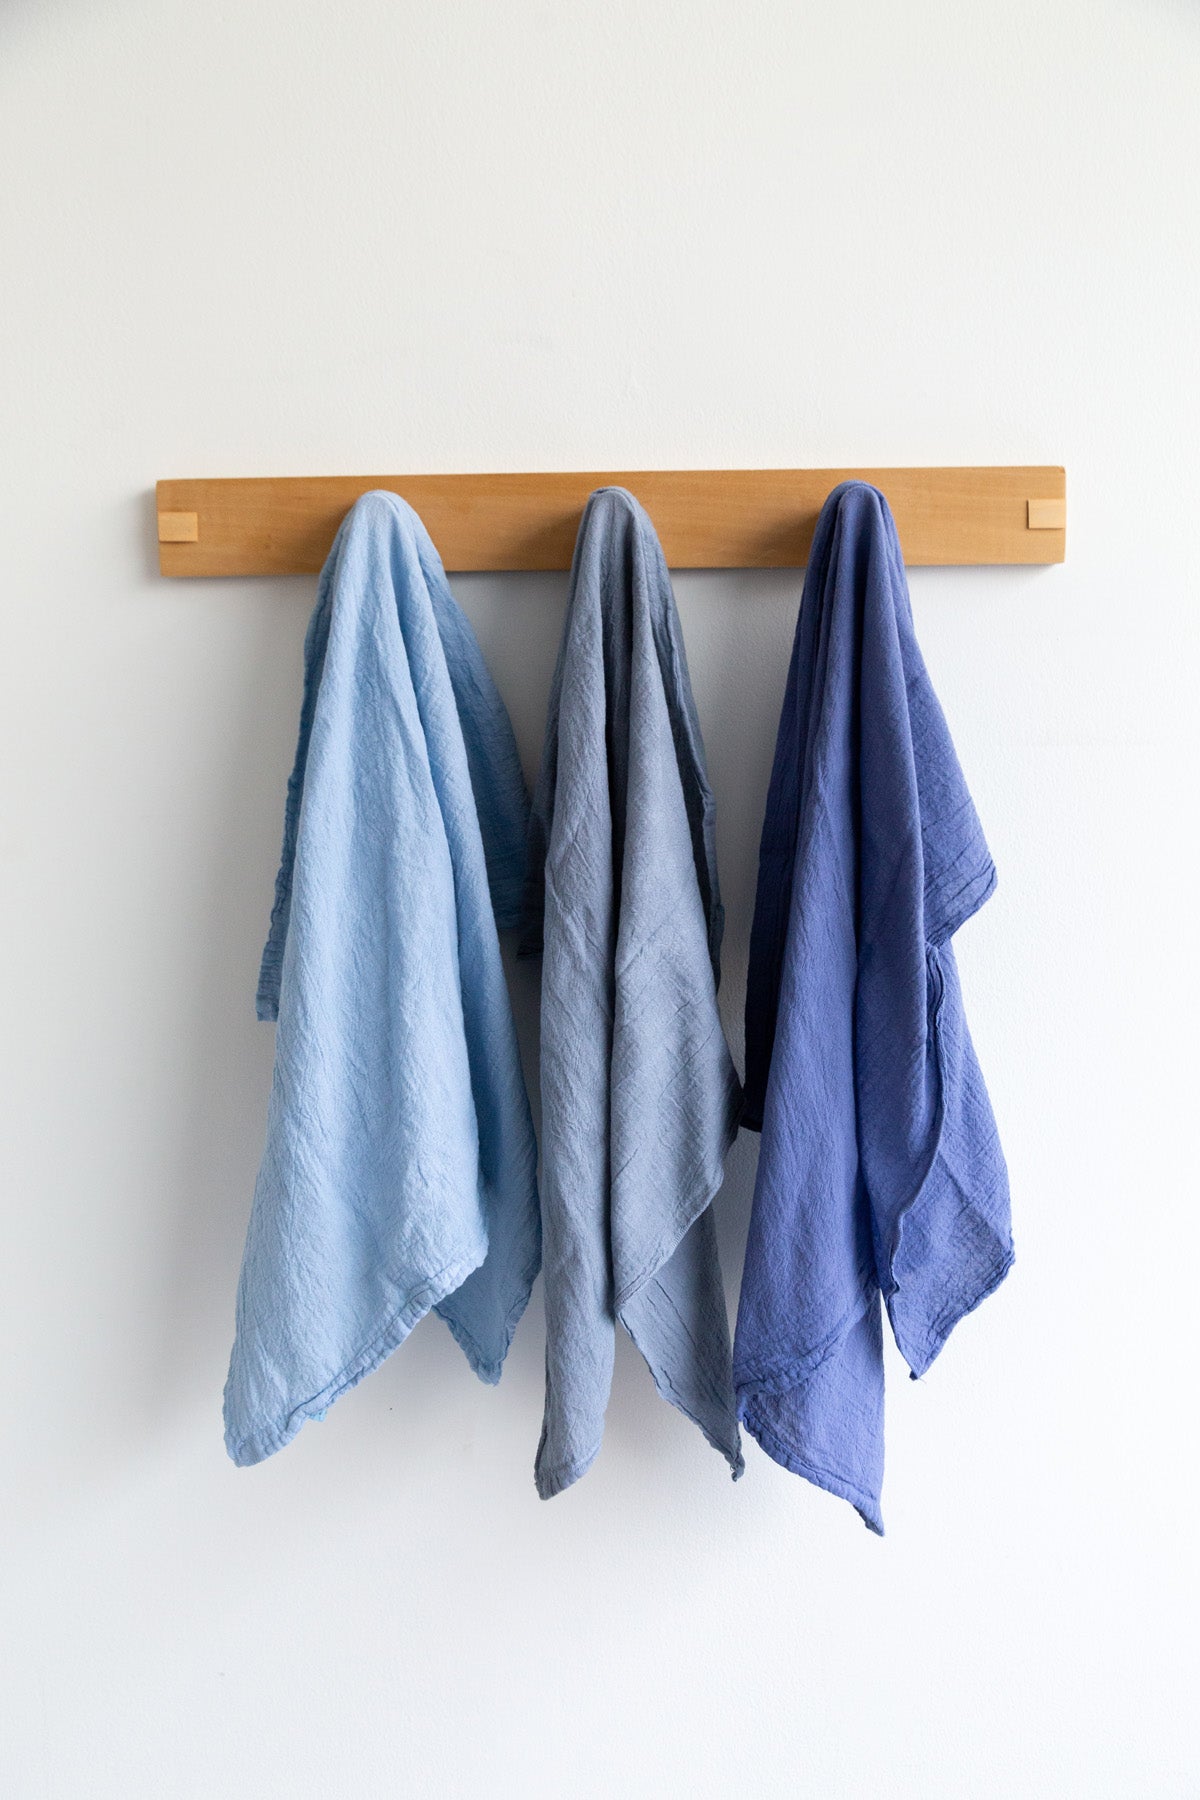 Hand-Dyed Dish Towels – Blue Trio (Set of 3)